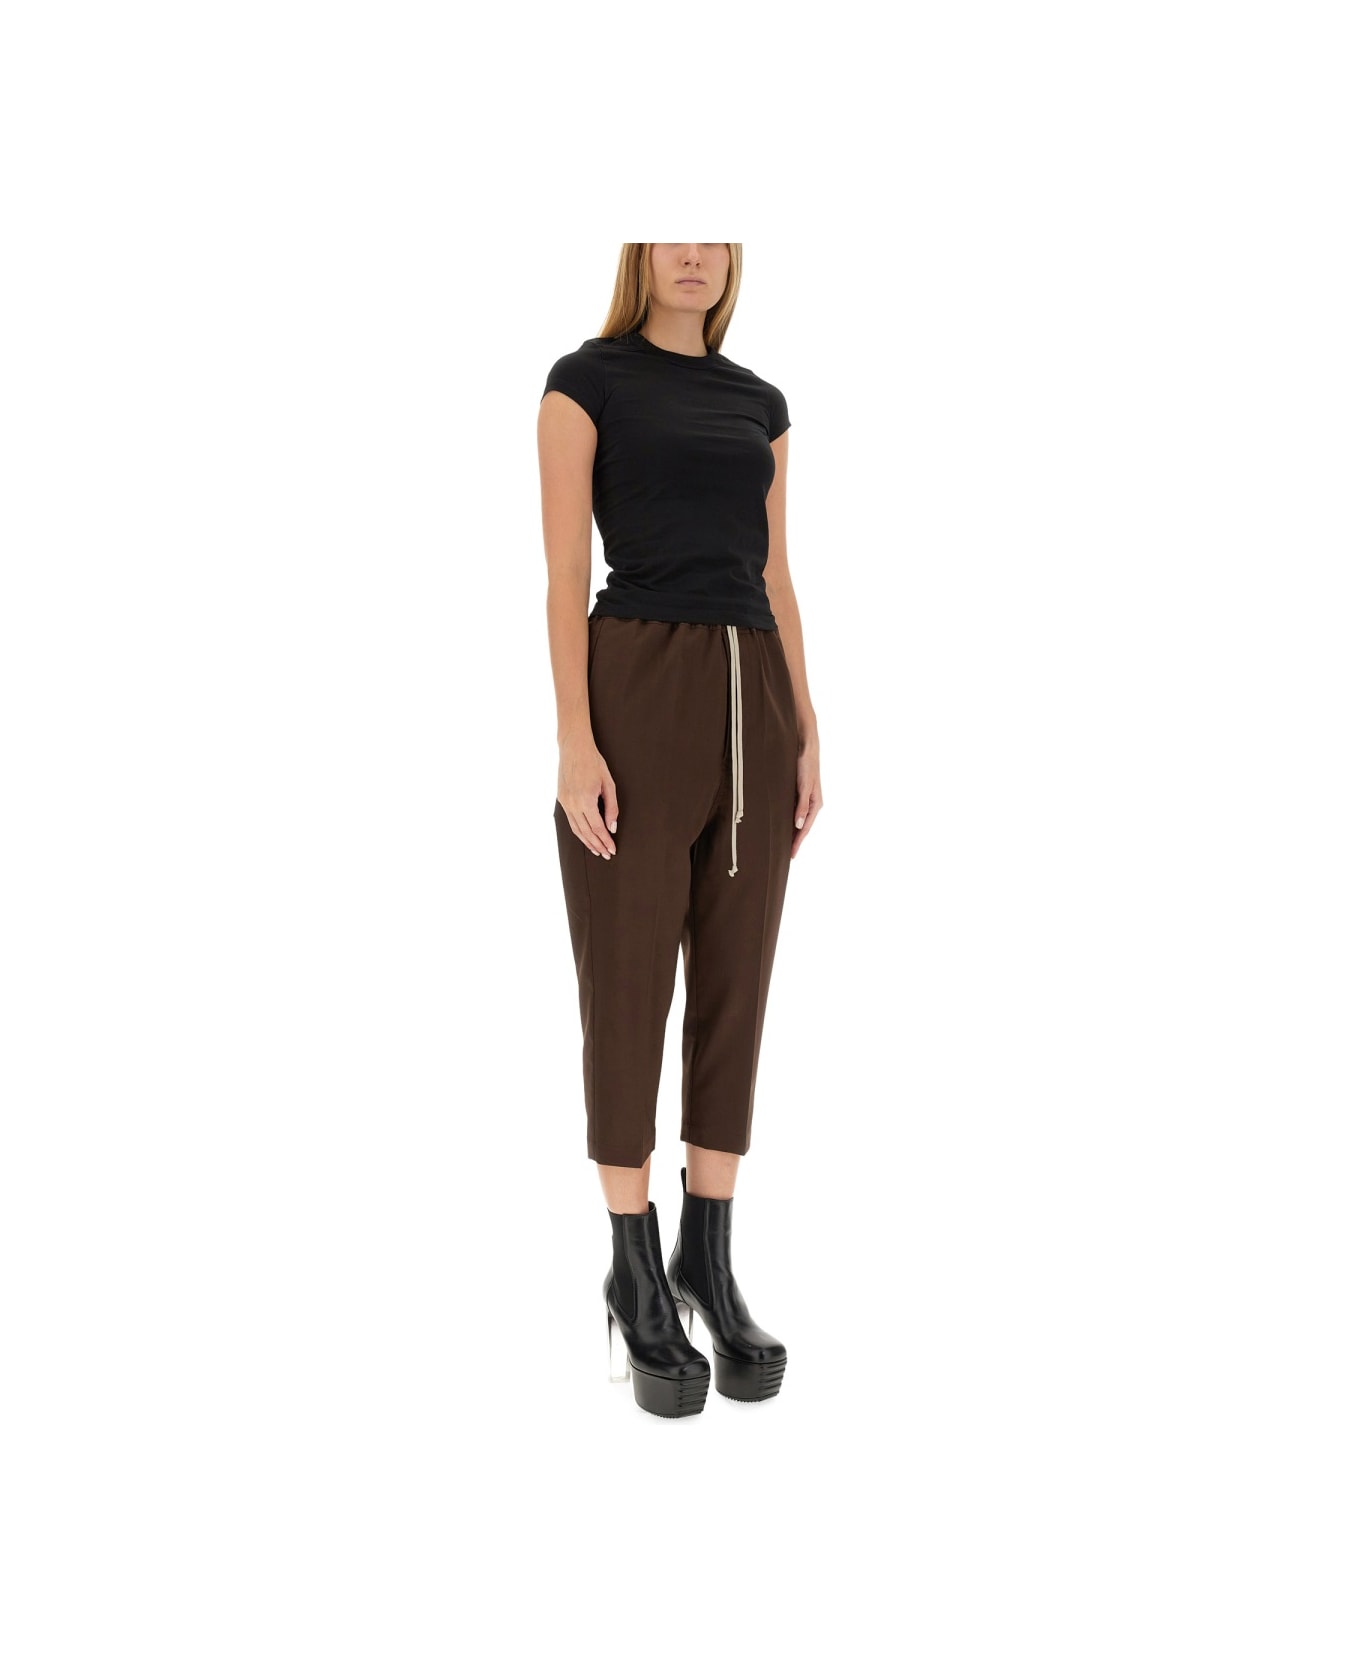 Rick Owens Drawstring Astaires Cropped Pants - BROWN